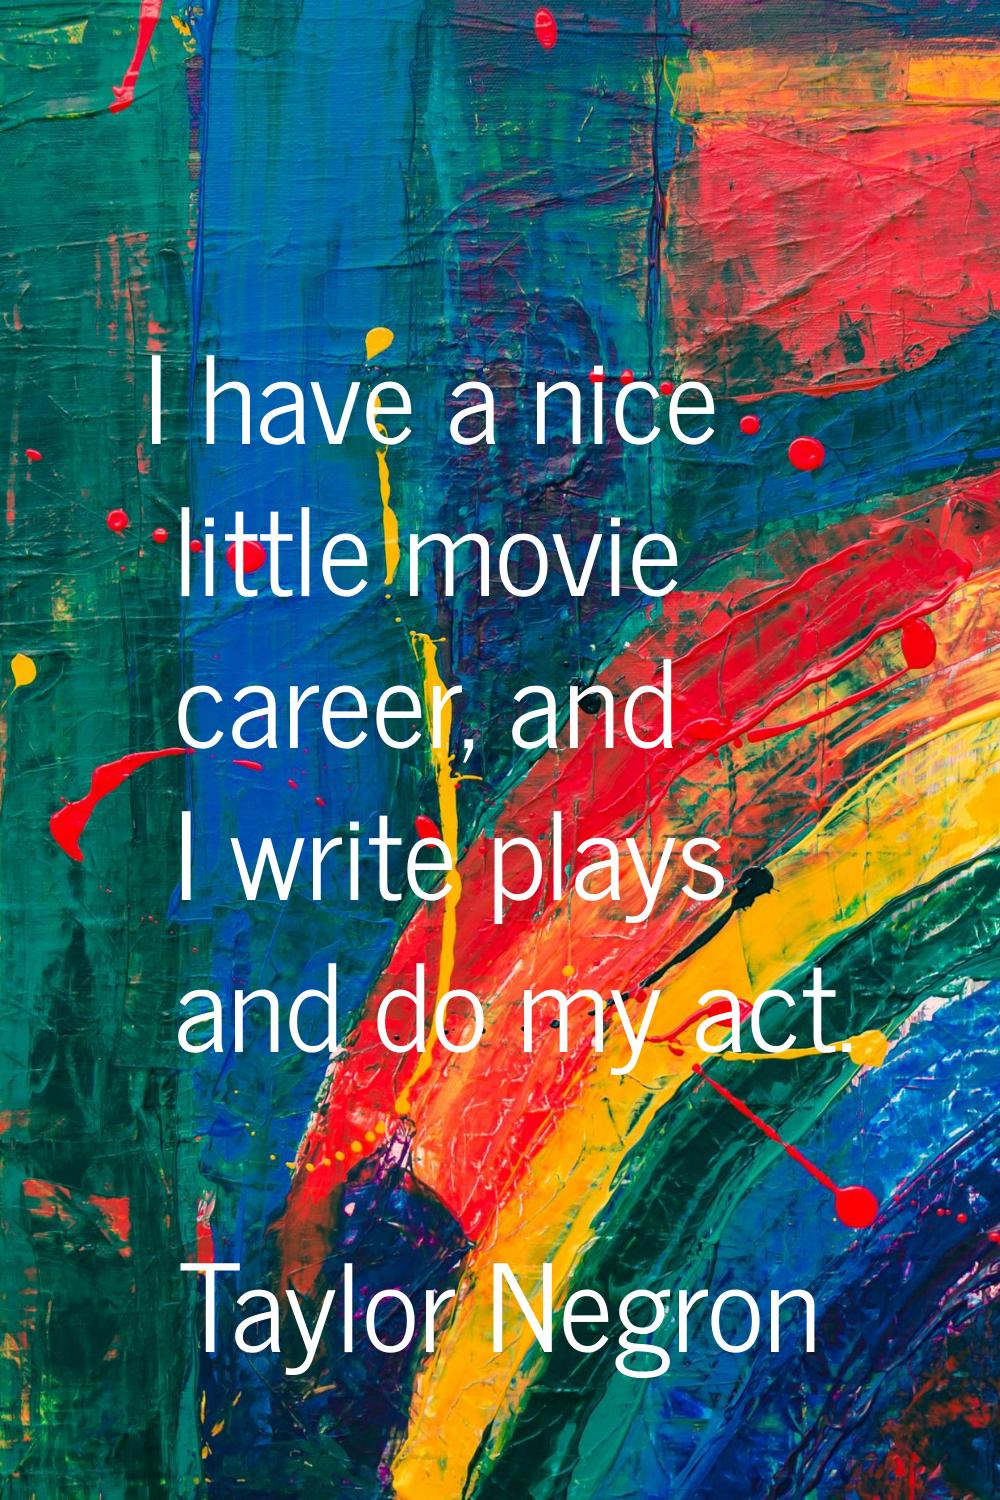 I have a nice little movie career, and I write plays and do my act.